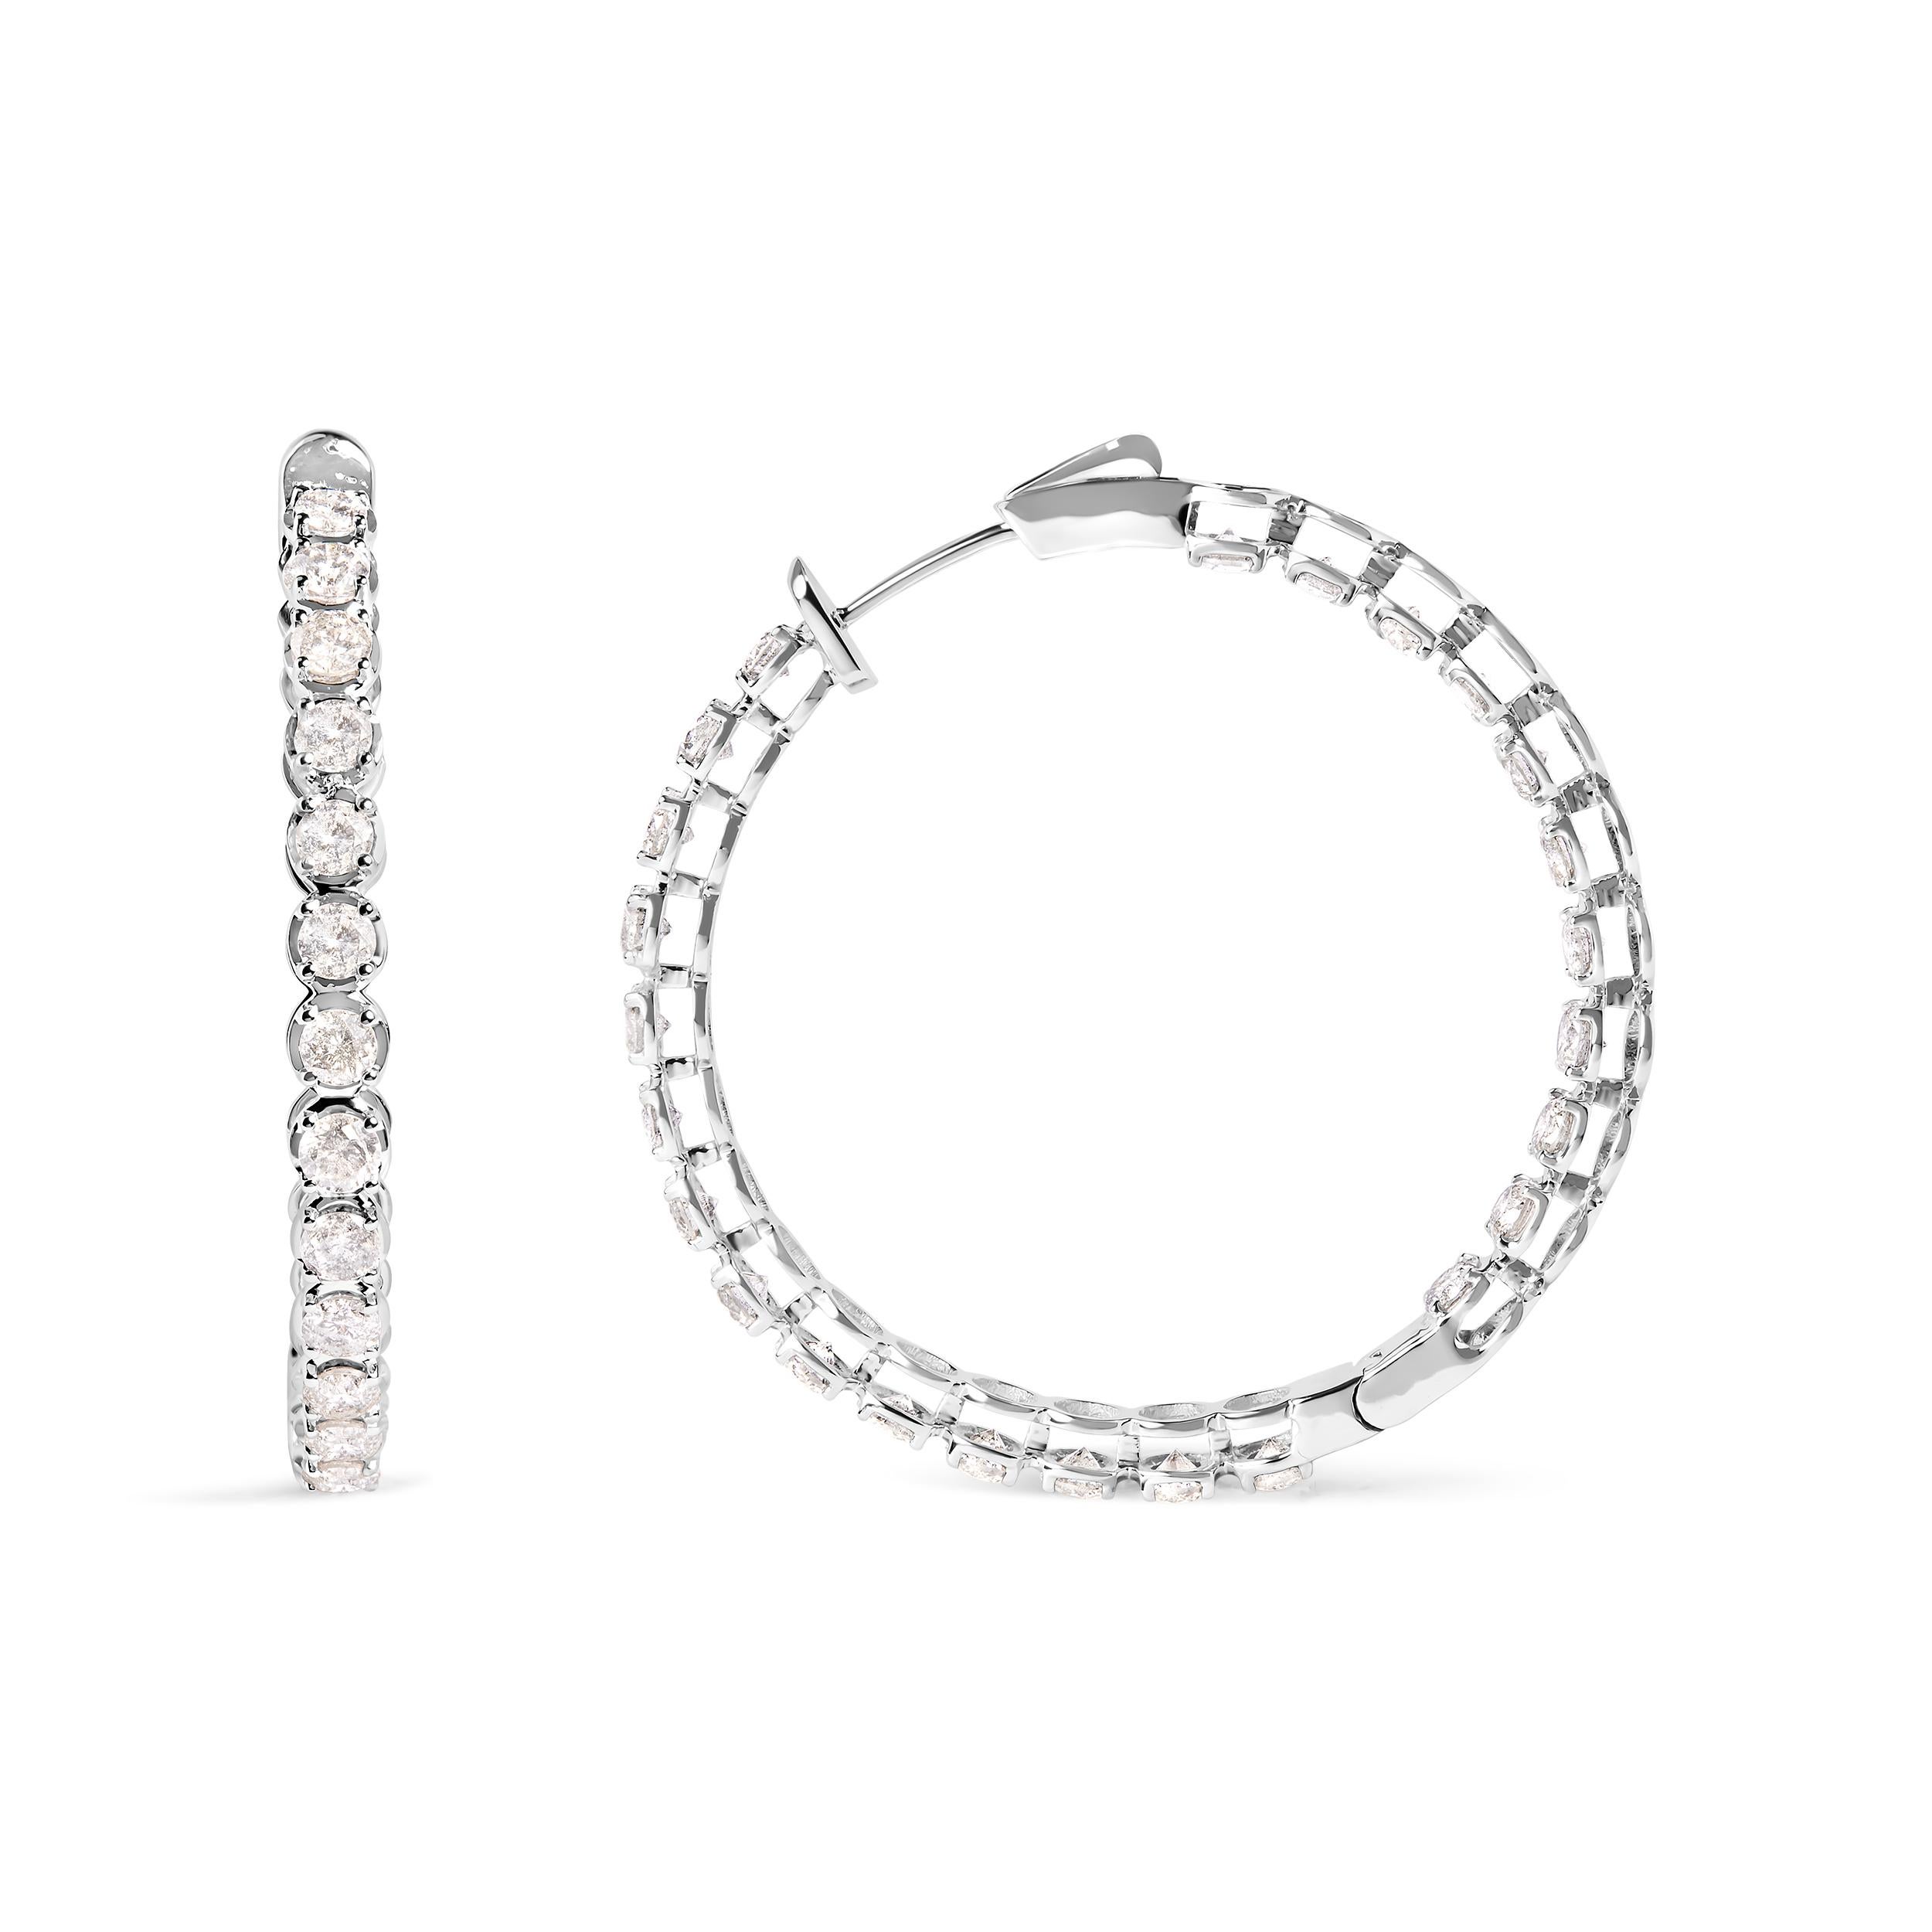 Expertly crafted from 14K white gold, these elegant hoop earrings are an embodiment of timeless sophistication. Encrusted with an impressive 7.0 carats total weight of diamonds, they radiate an enticing sparkle with an I-J color and I2-I3 clarity,